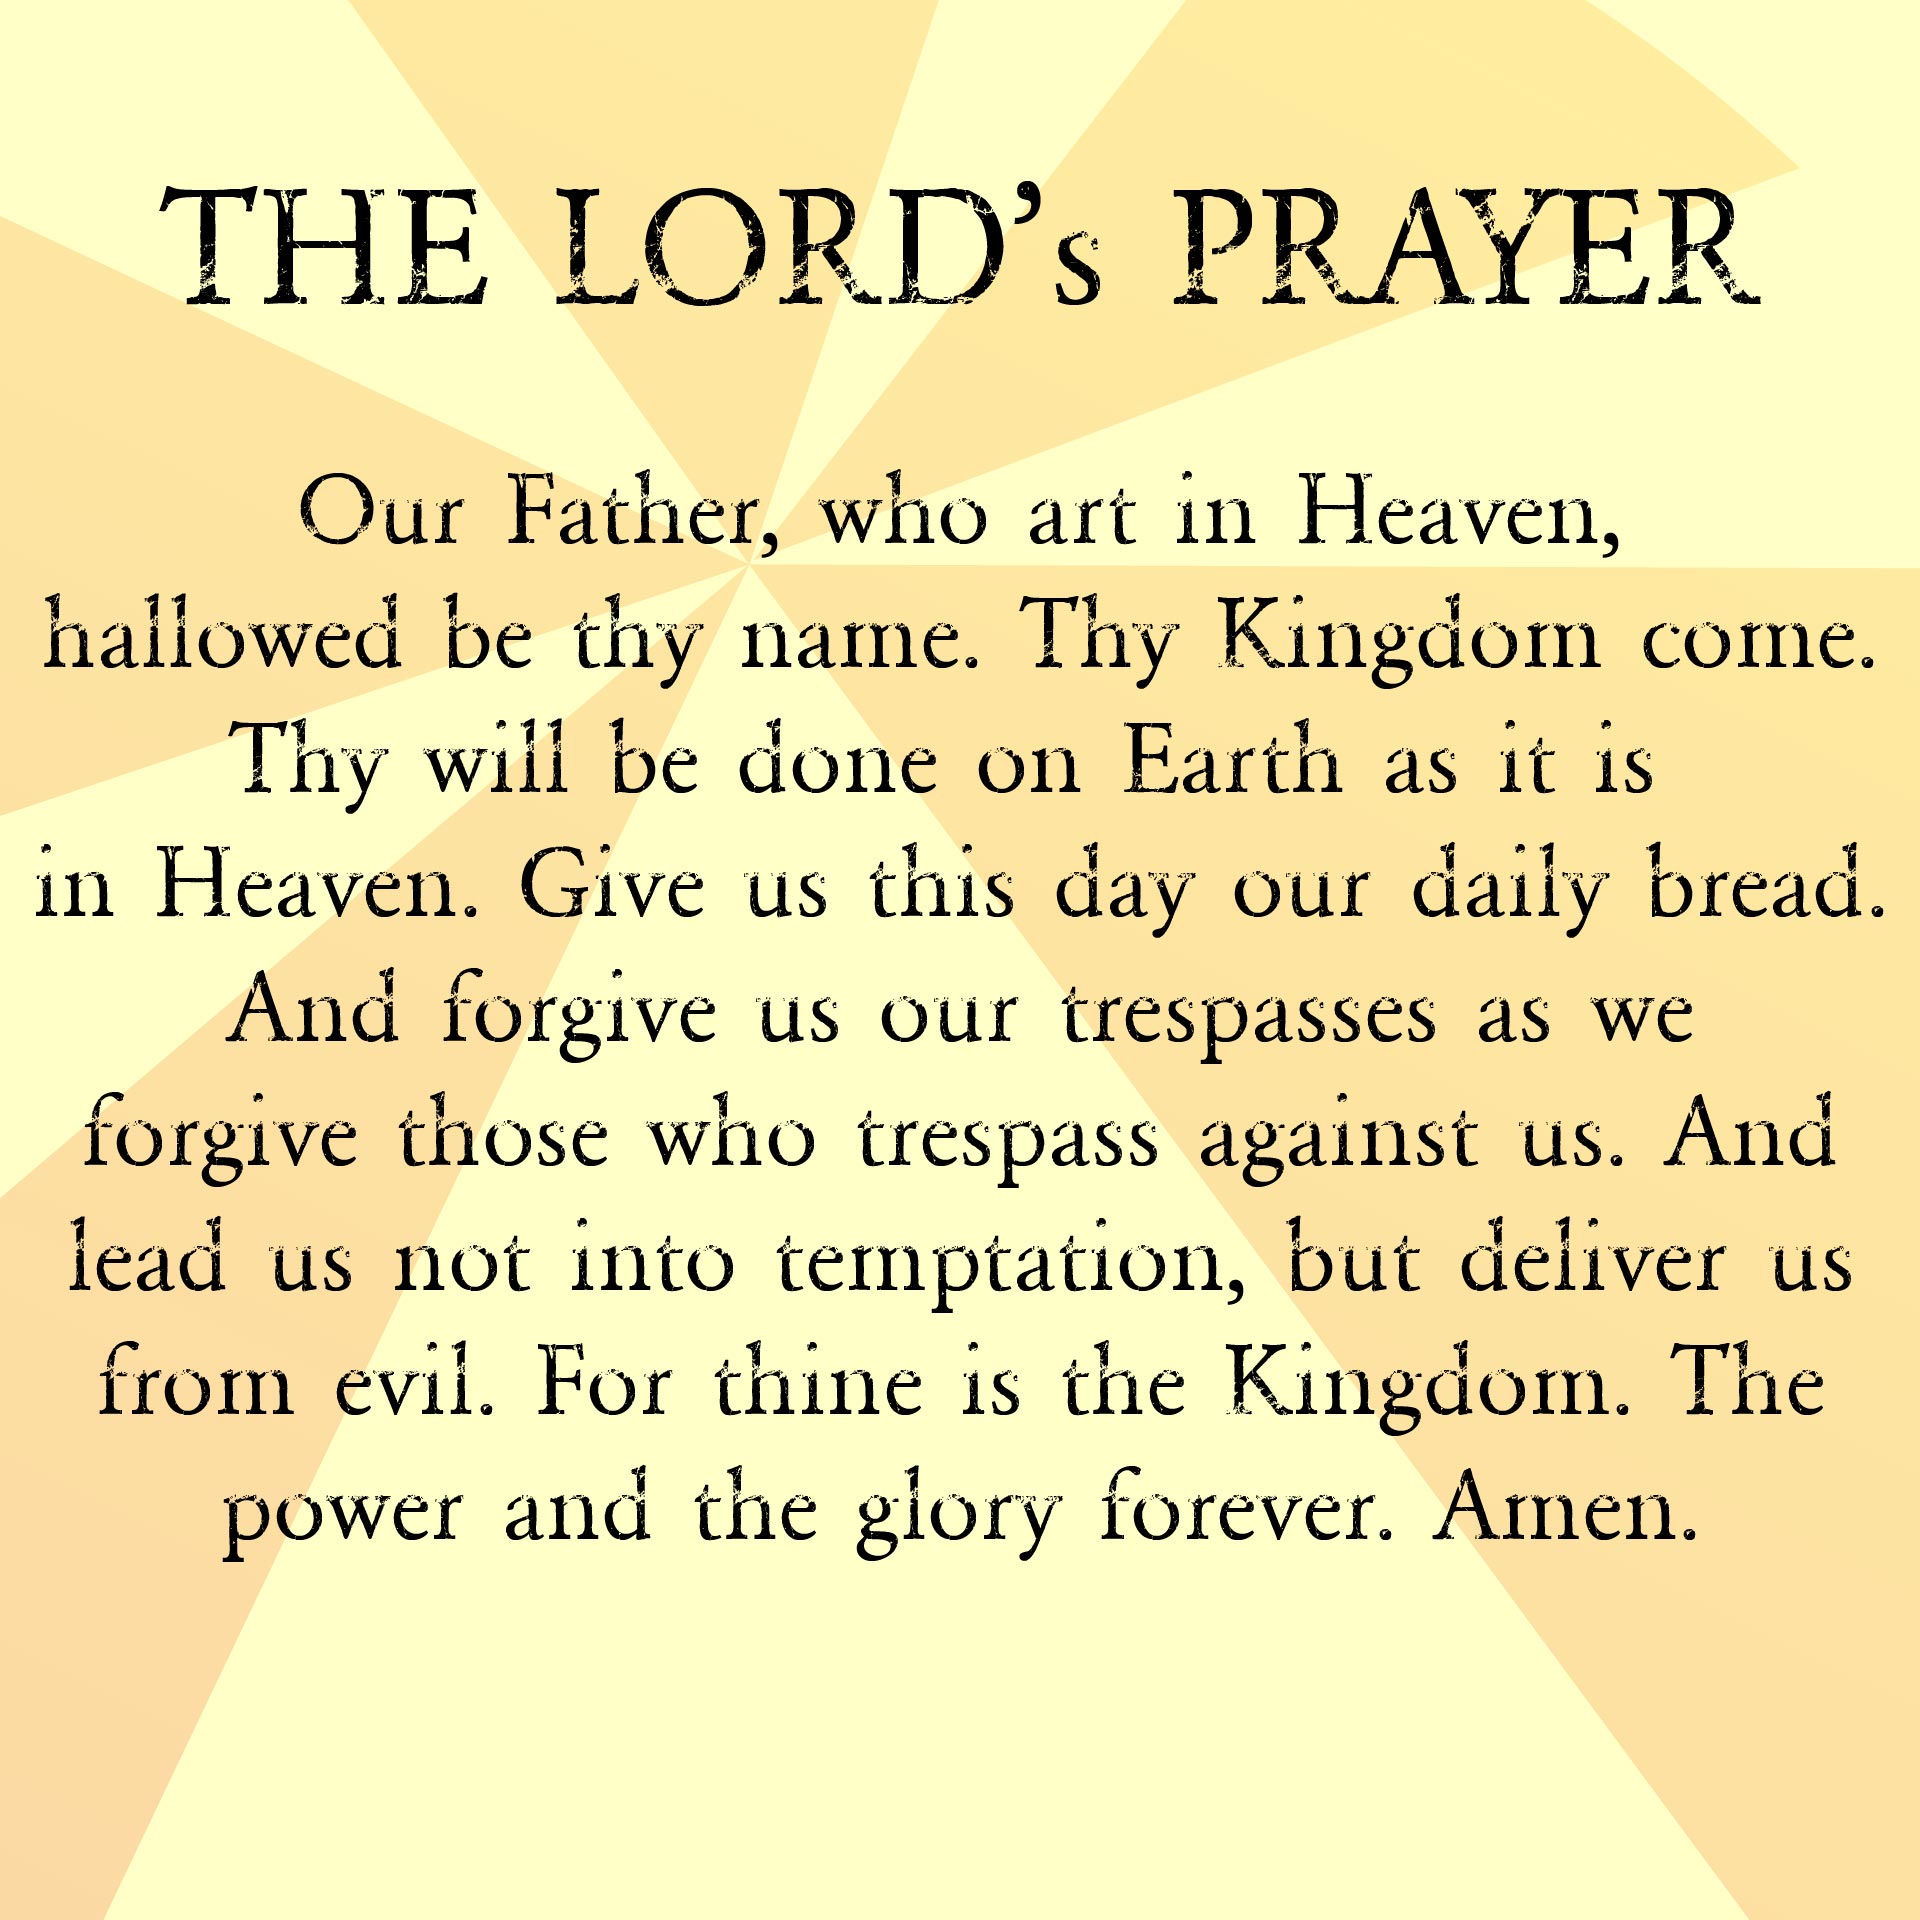 8-best-images-of-the-lord-prayer-printable-lord-s-prayer-to-print